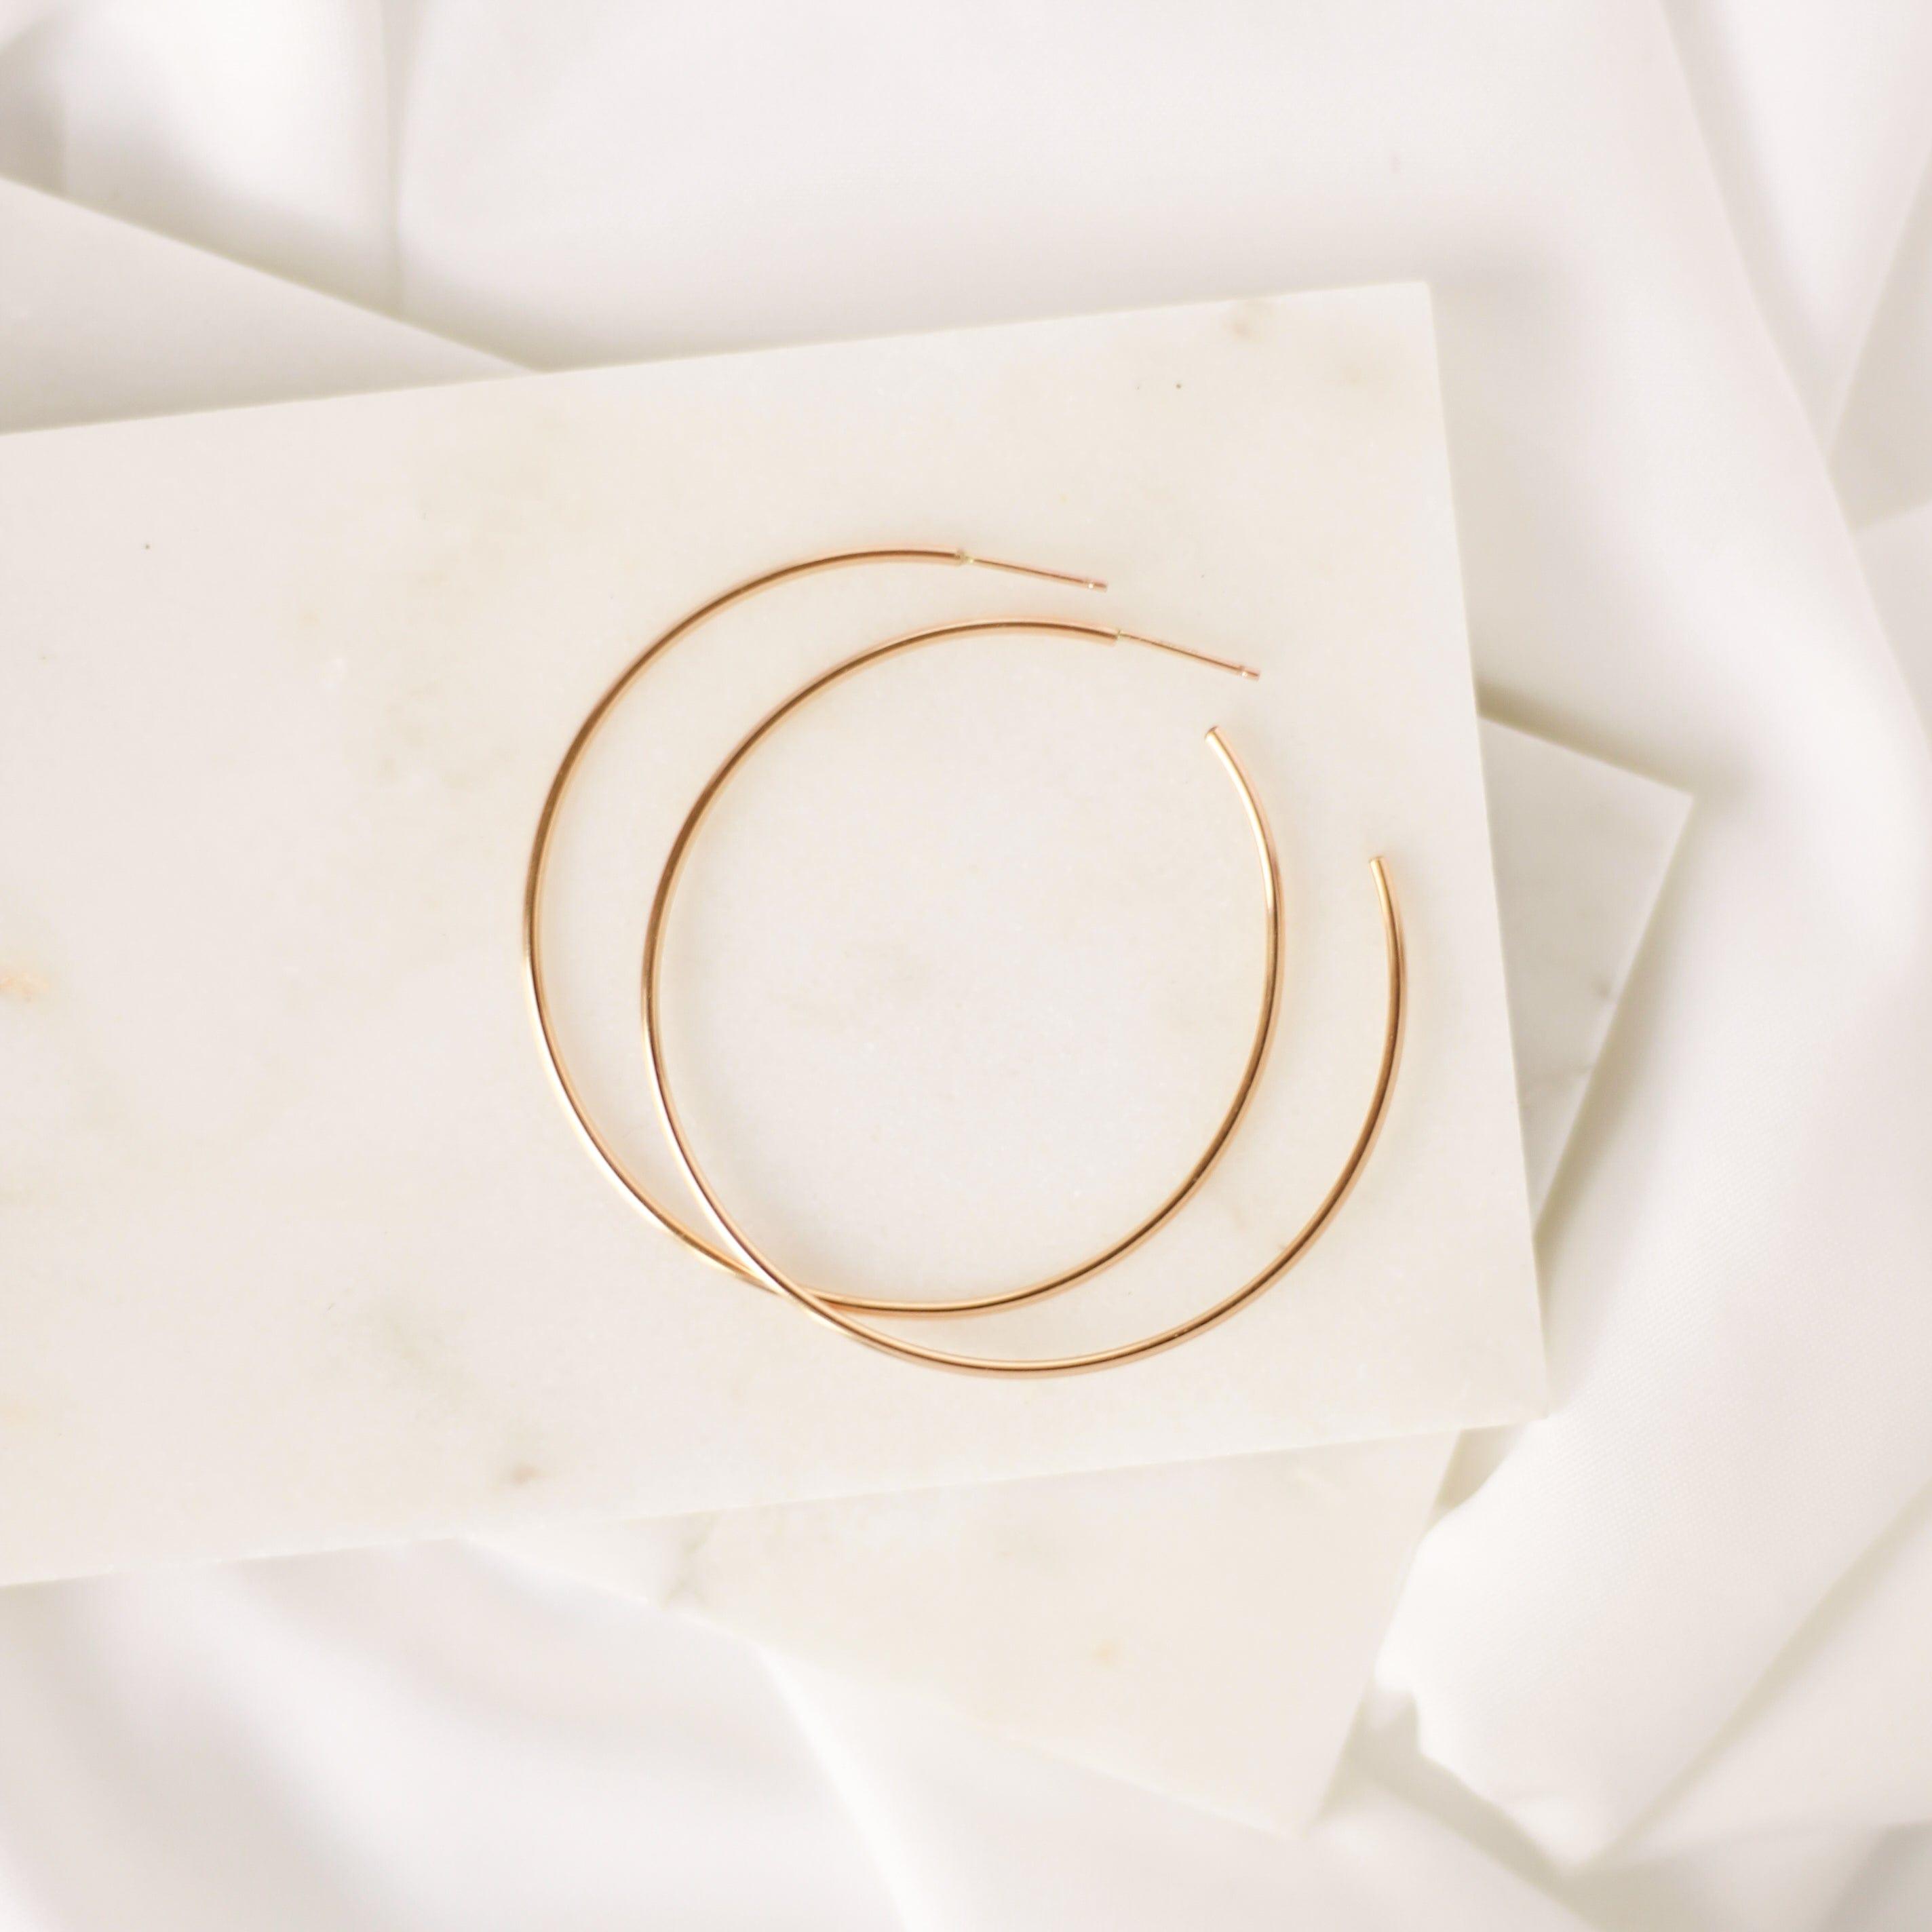 Large Everyday Hoop Earrings - Nolia Jewelry - Meaningful + Sustainably Handcrafted Jewelry